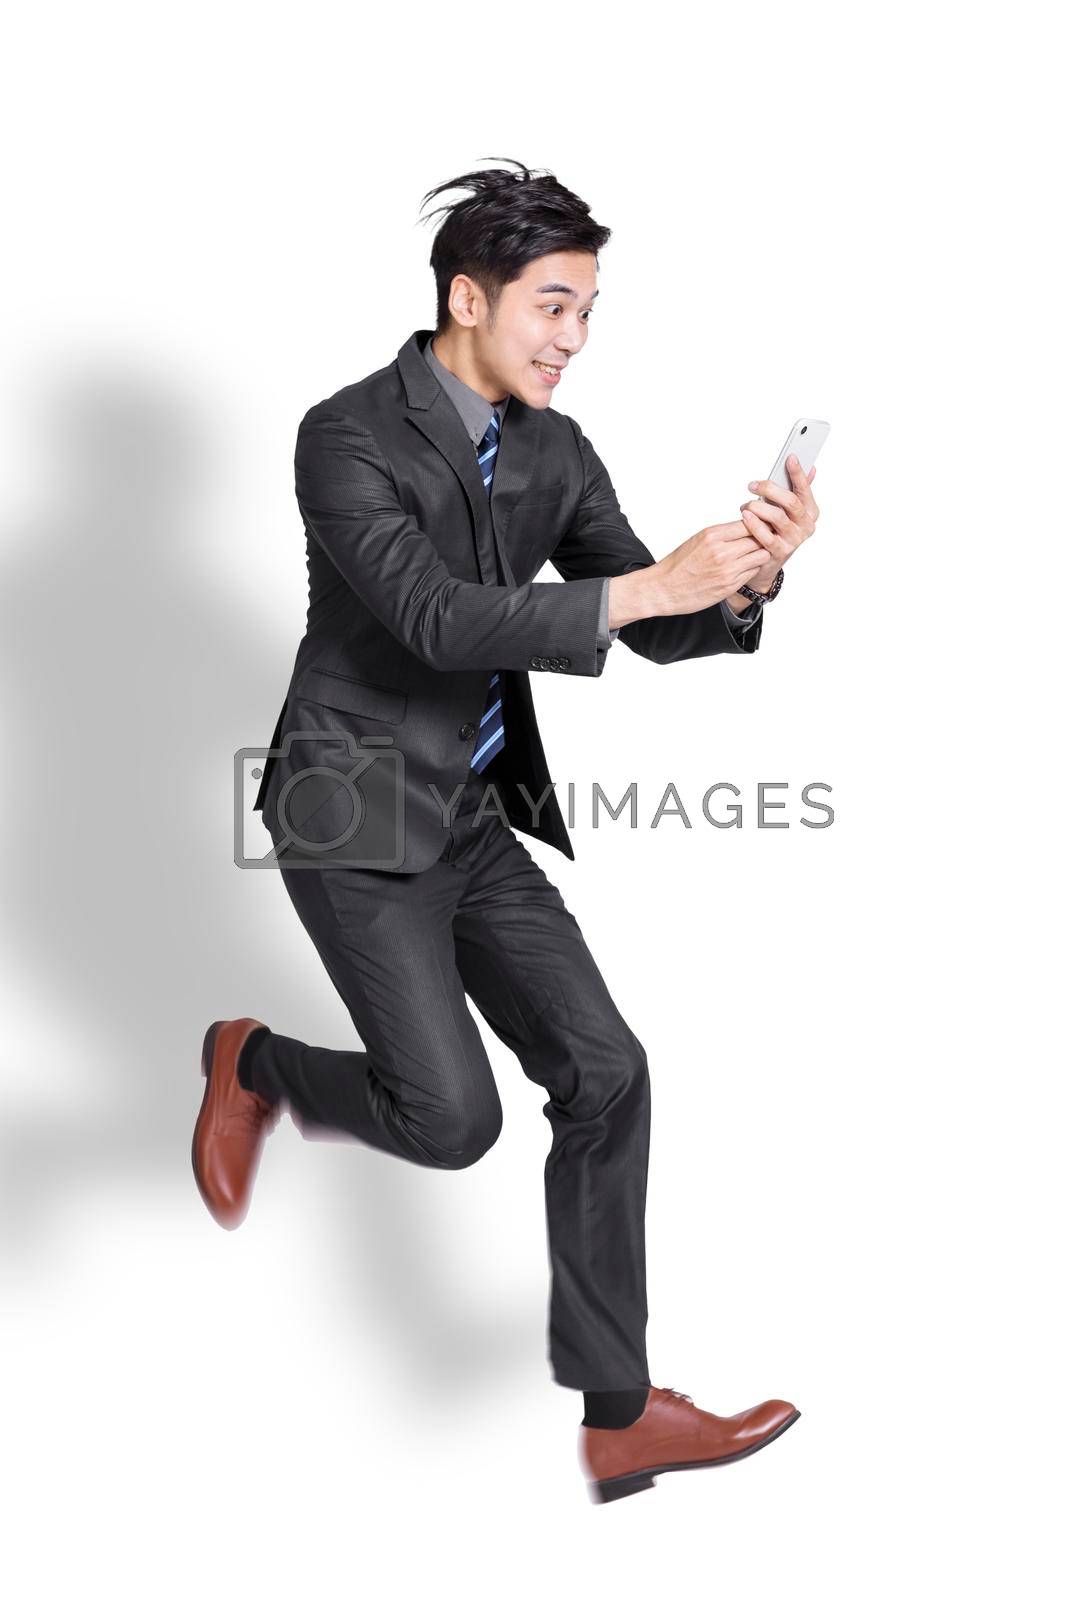 Royalty free image of Excited Young handsome businessman  jumping and using mobile phone by tomwang